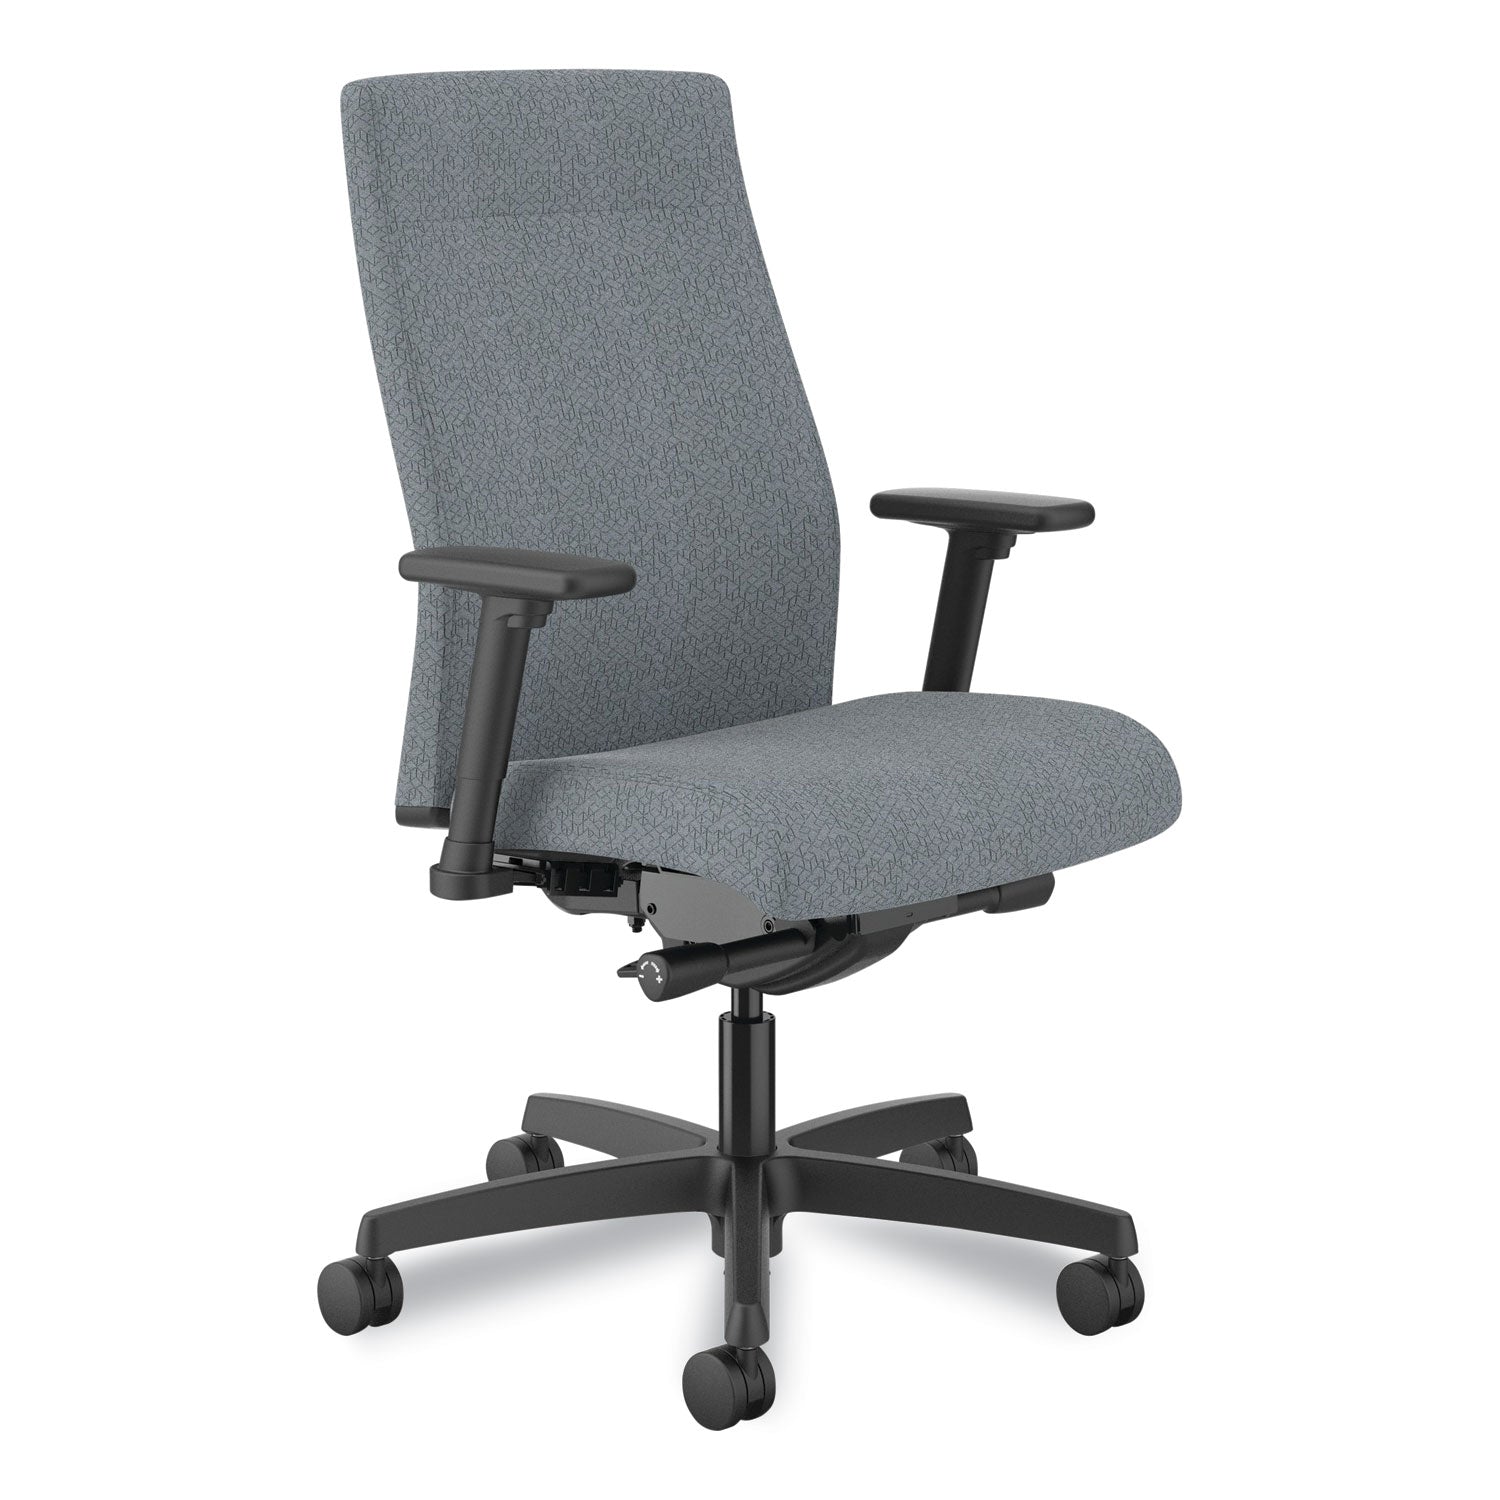 ignition-20-upholstered-mid-back-task-chair-17-to-2125-seat-height-basalt-fabric-seat-back-ships-in-7-10-business-days_honi2u2ahax25tk - 1